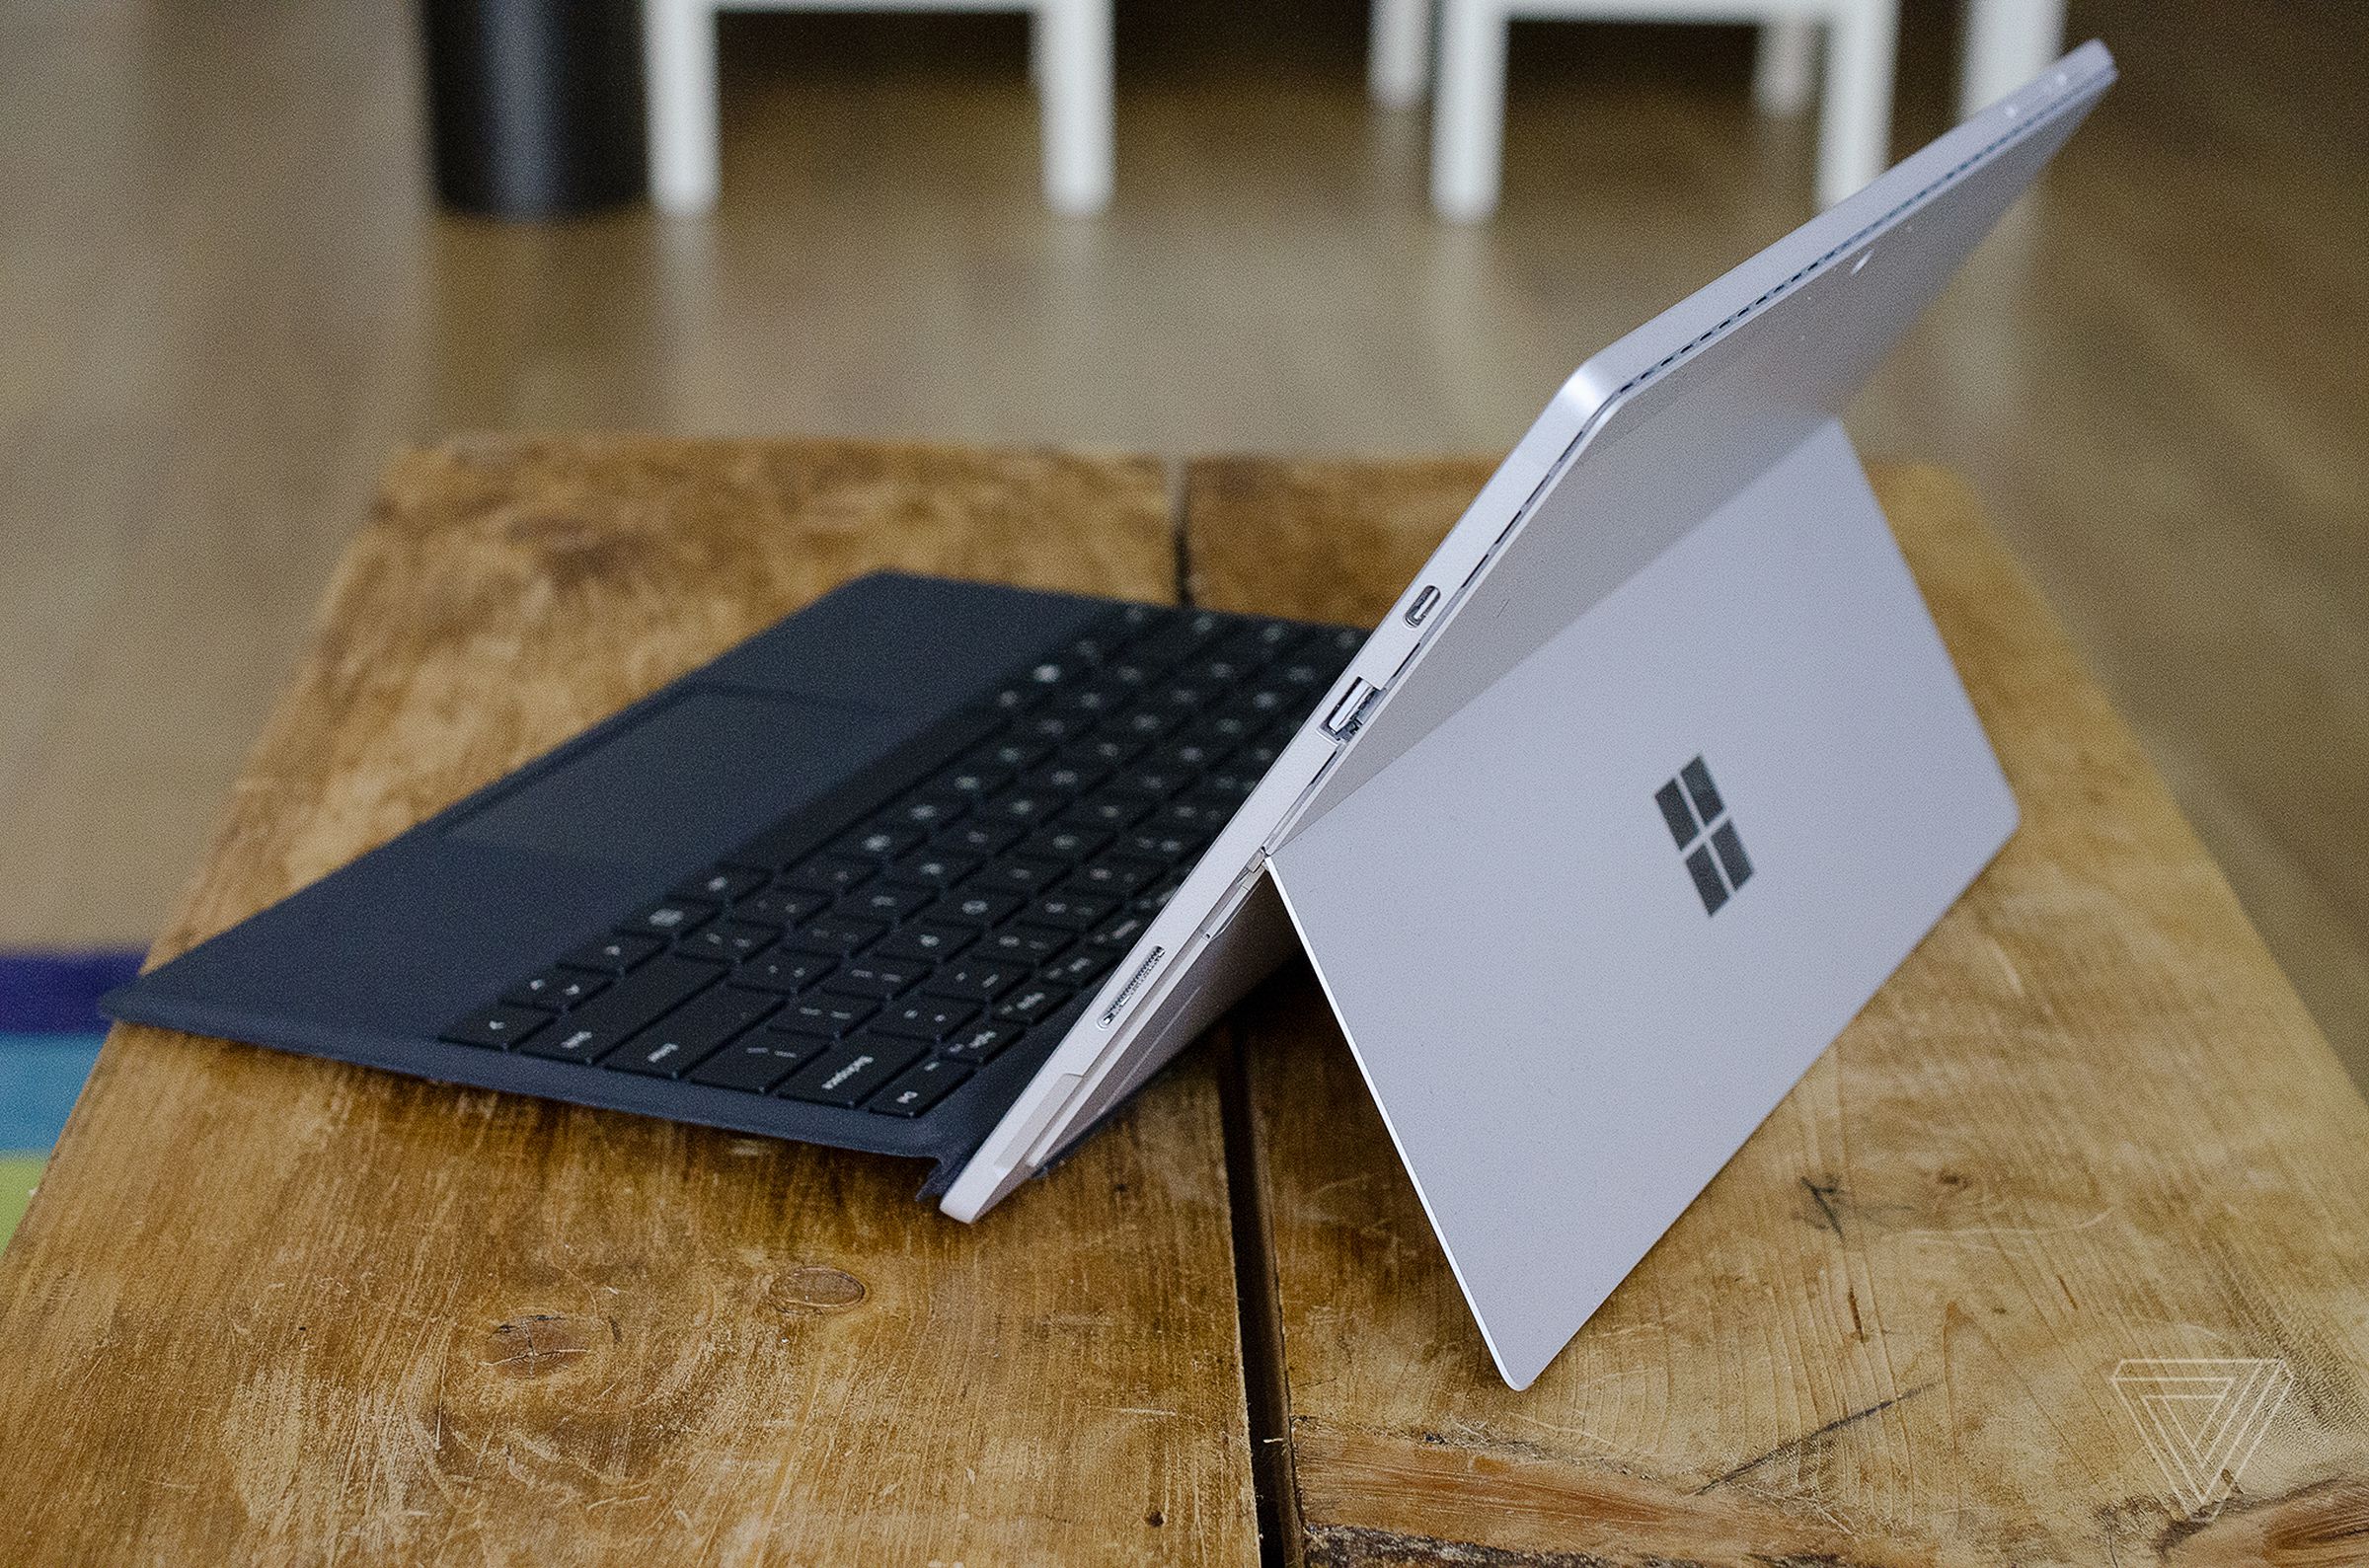 Microsoft’s Surface Pro 7 Plus is only available to businesses and schools.